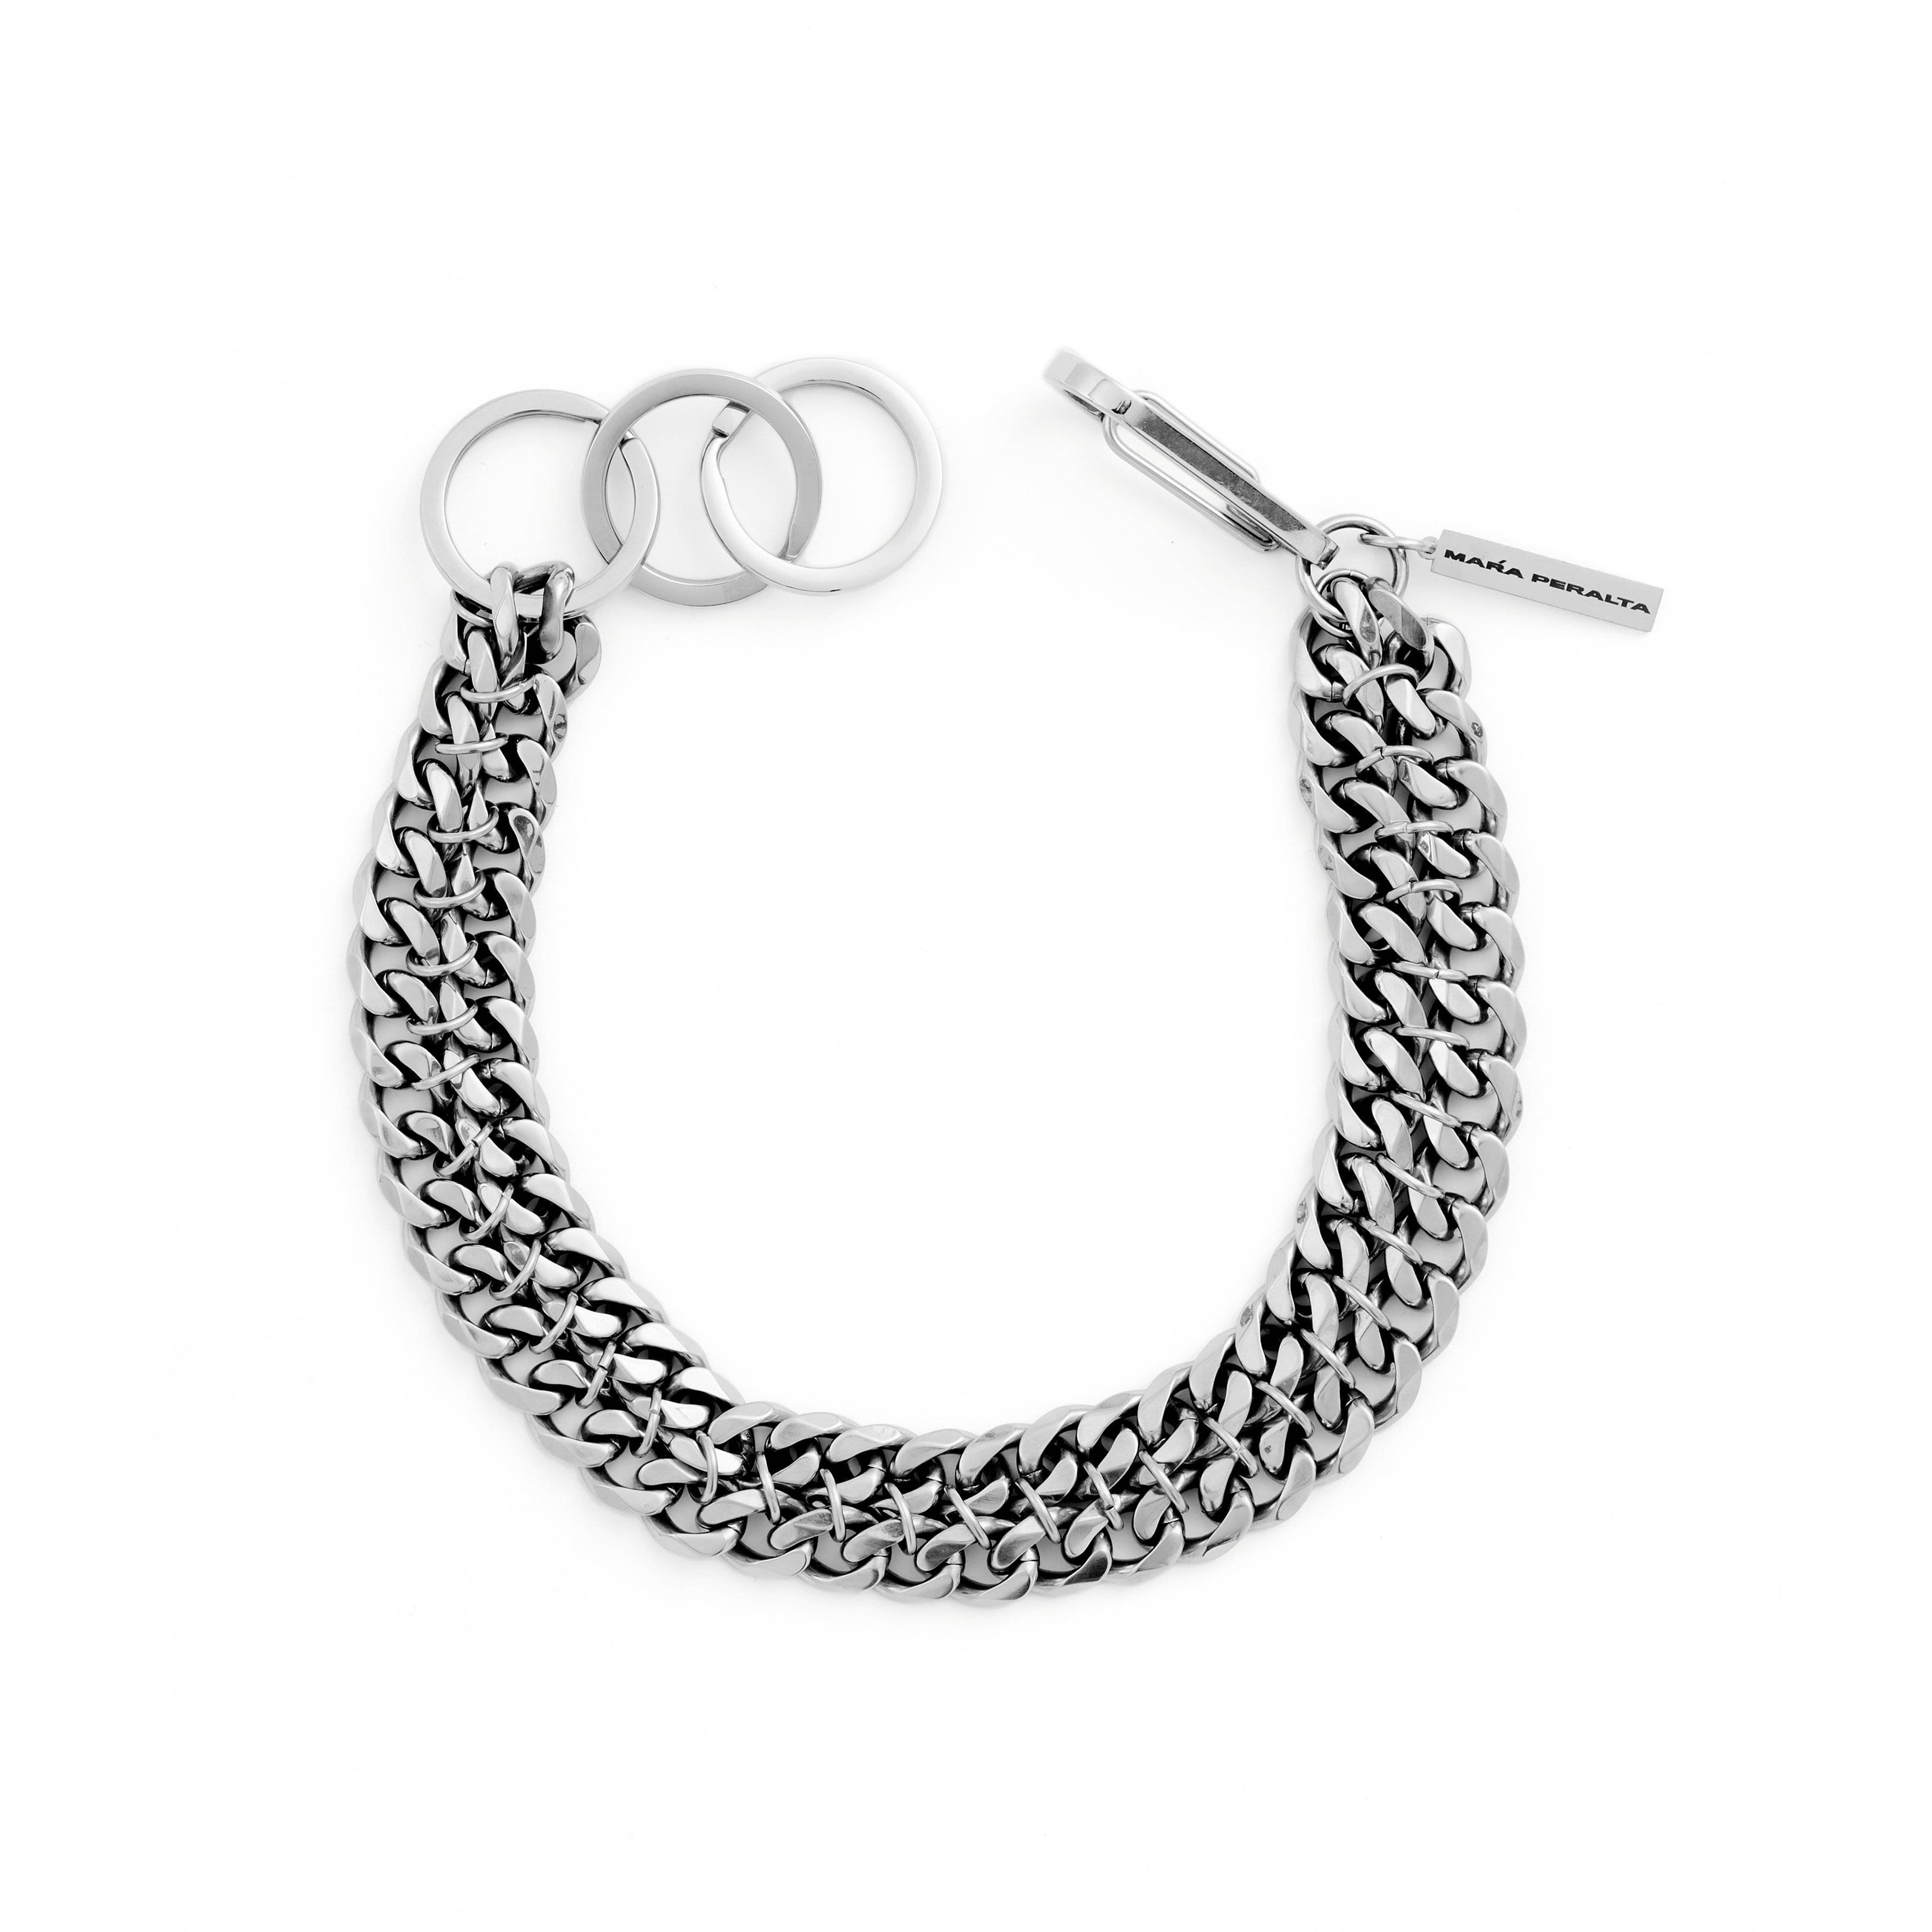 Stacked Chain Mail Ring – Maŕa Peralta Studio